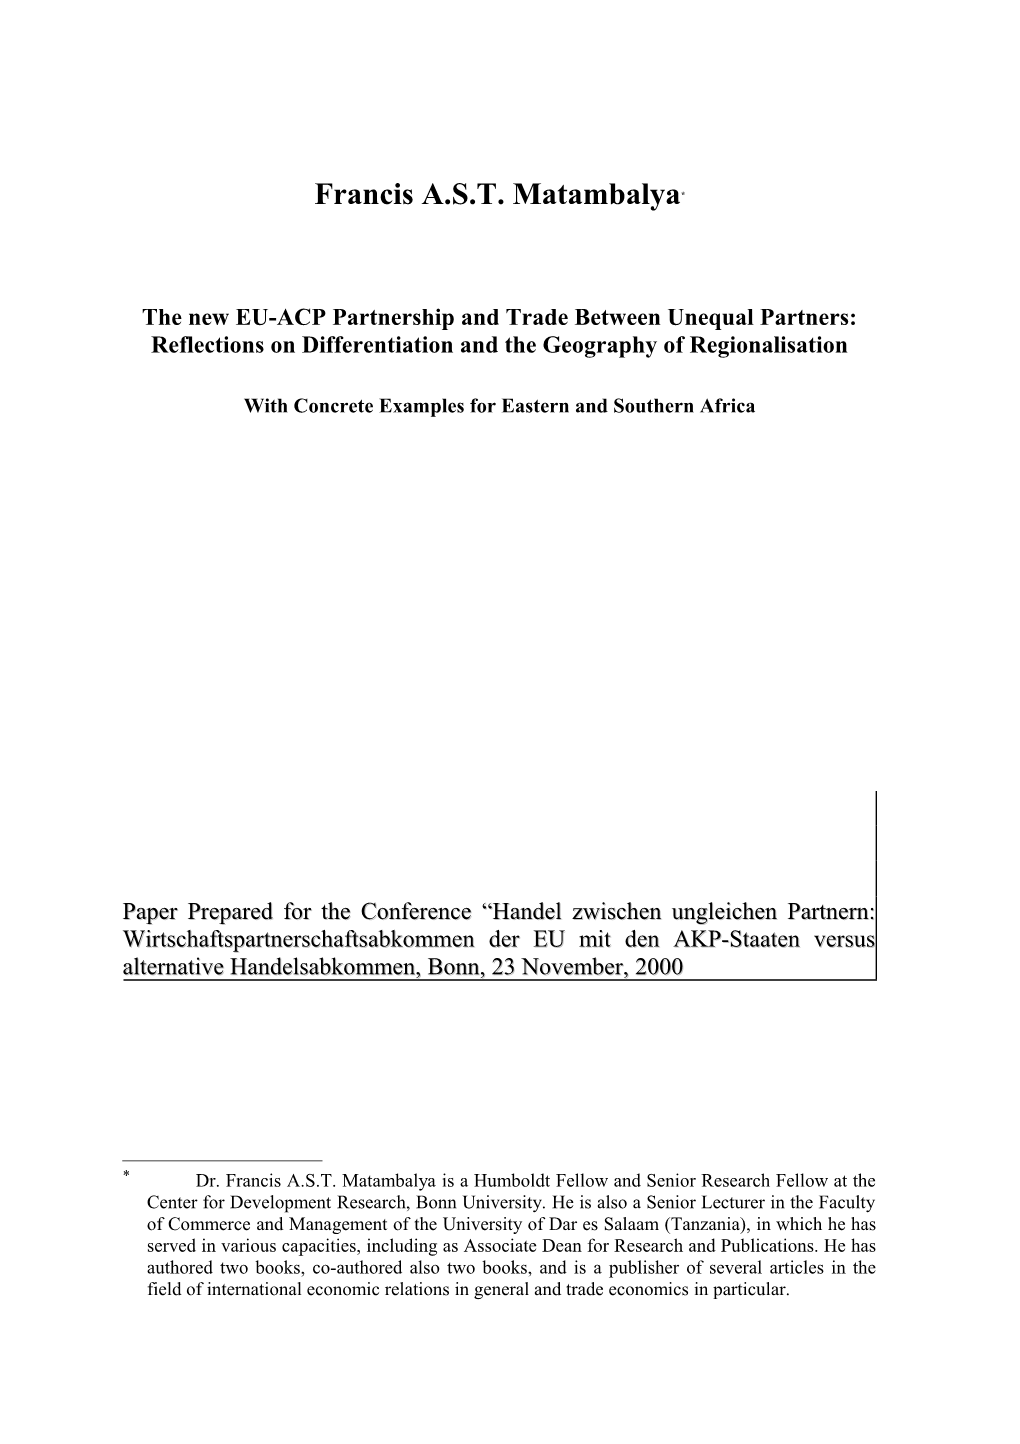 EU-ACP Trade Between Unequal Partners: Reflections on Differentiation and Regionalisation 1